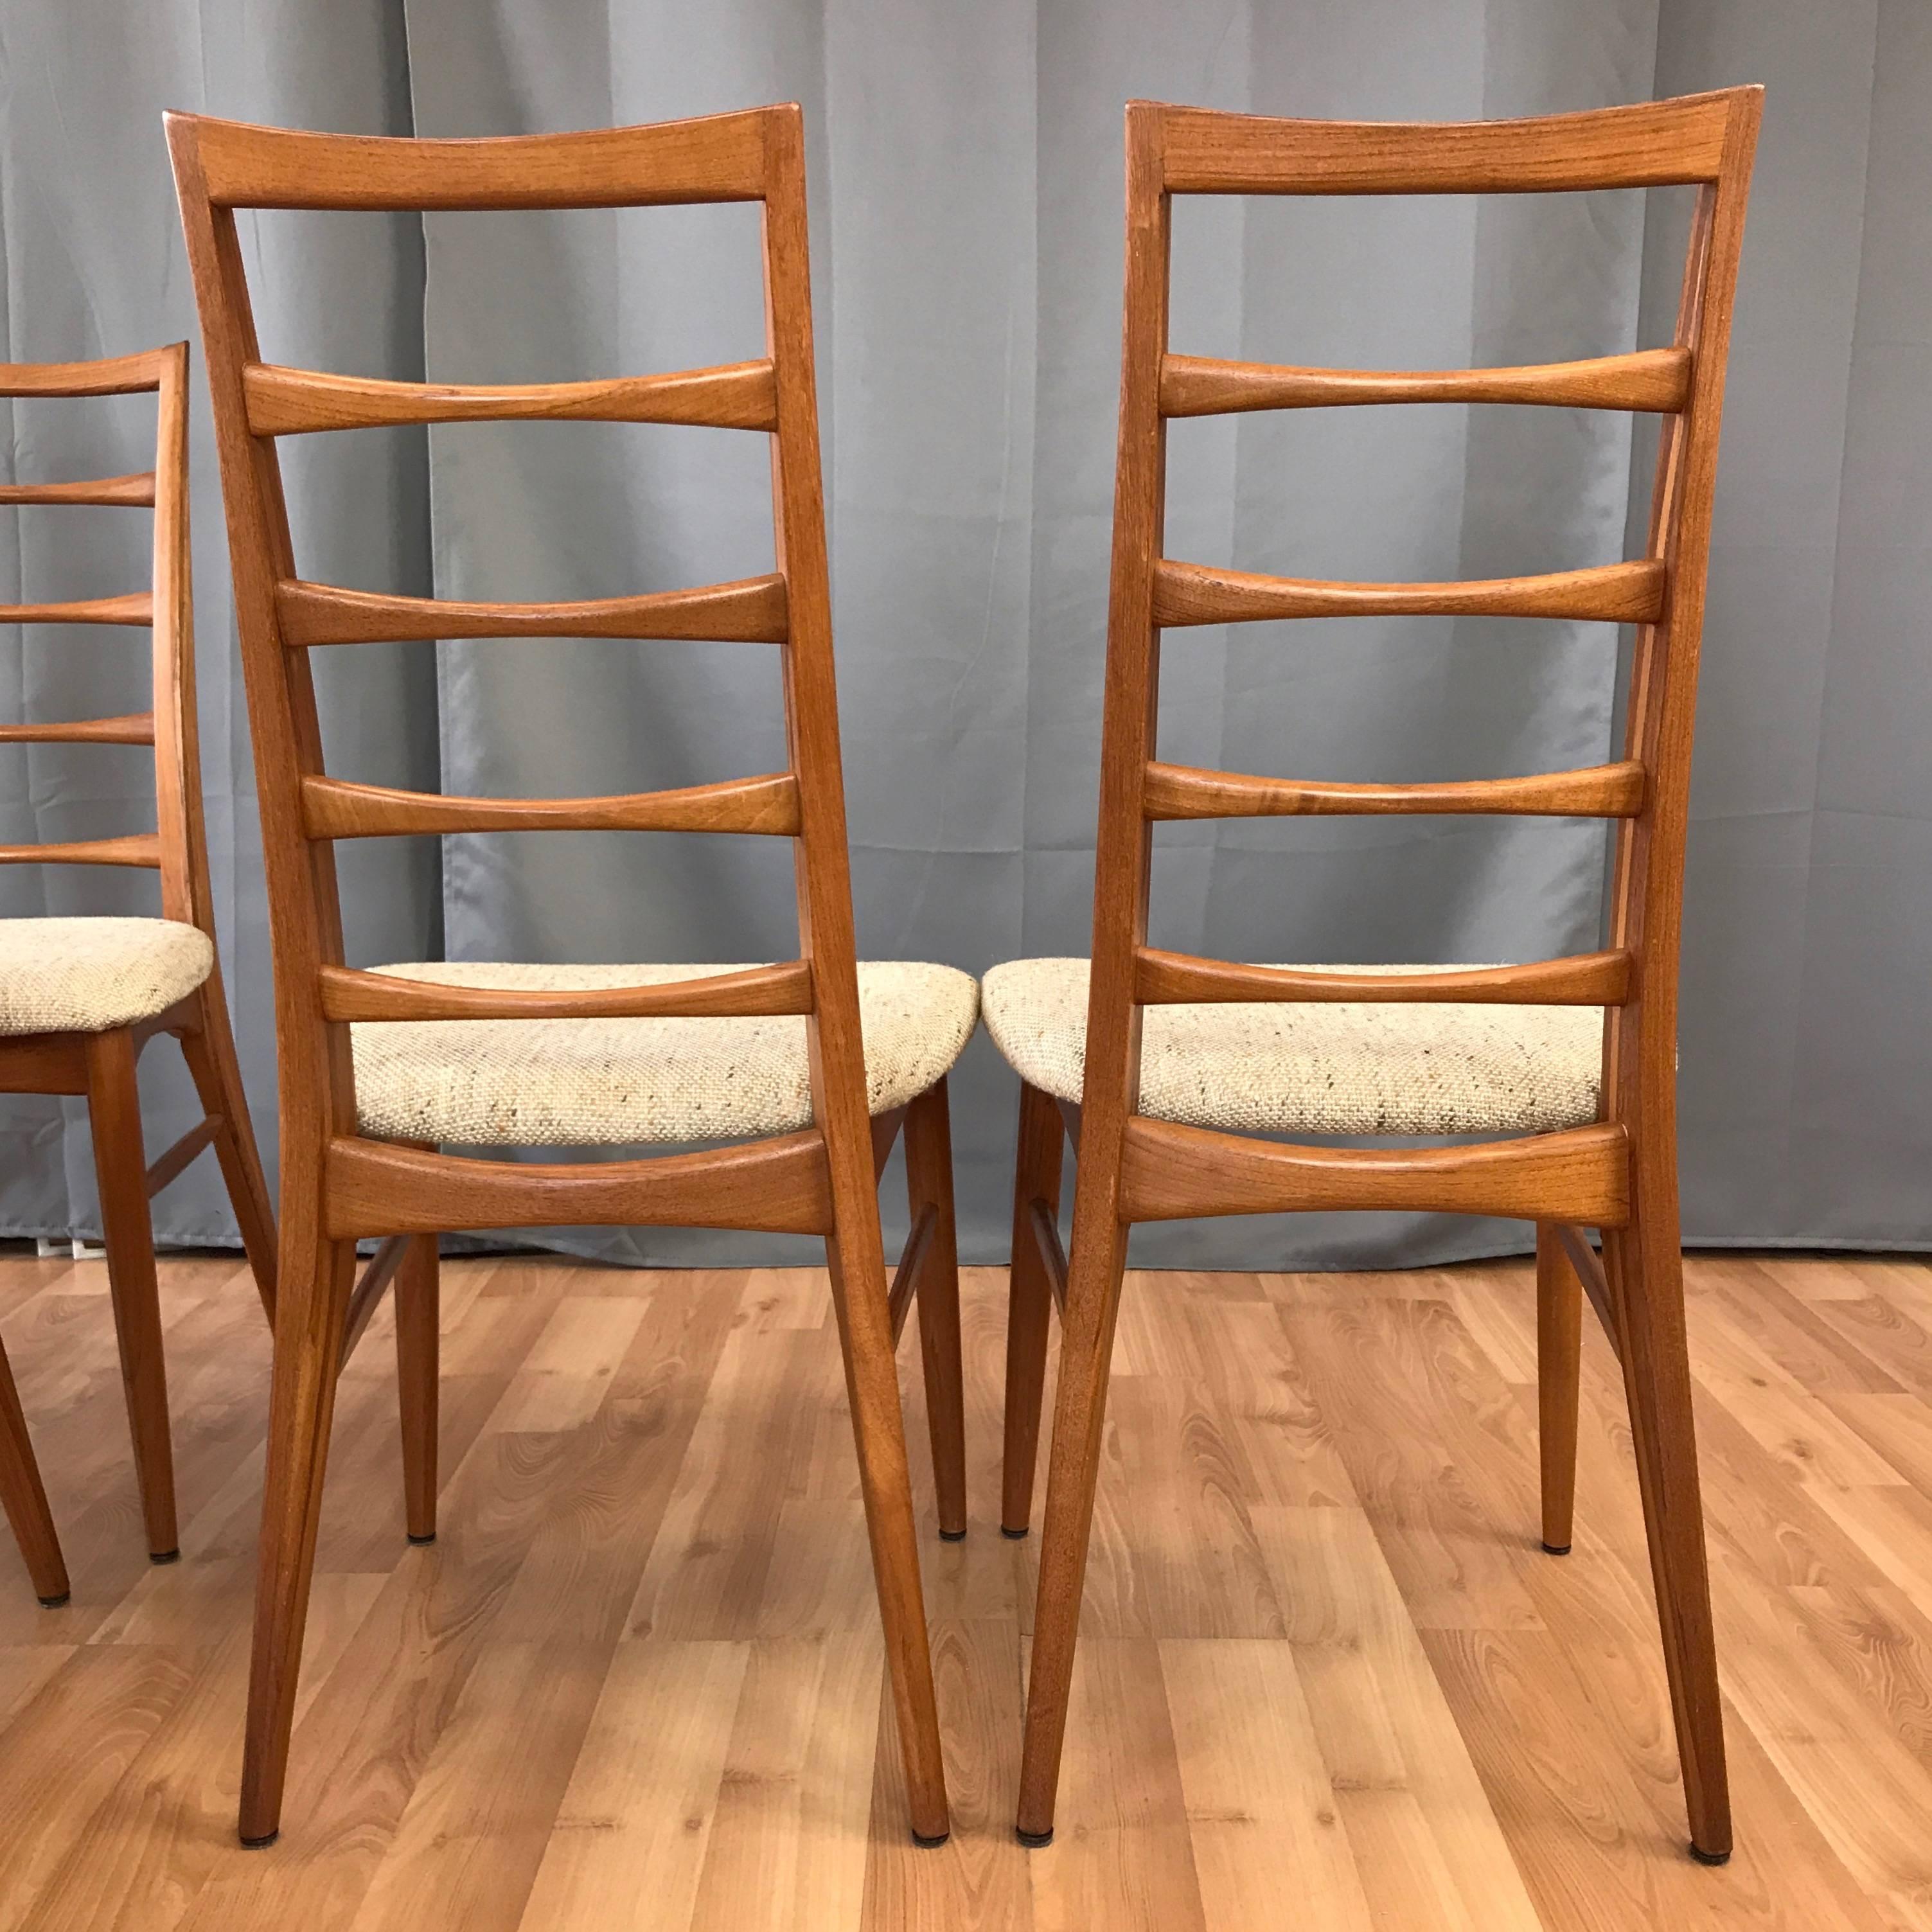 Mid-20th Century Set of Eight Niels Kofoed for Koefoeds Hornslet “Lis” Teak Dining Chairs